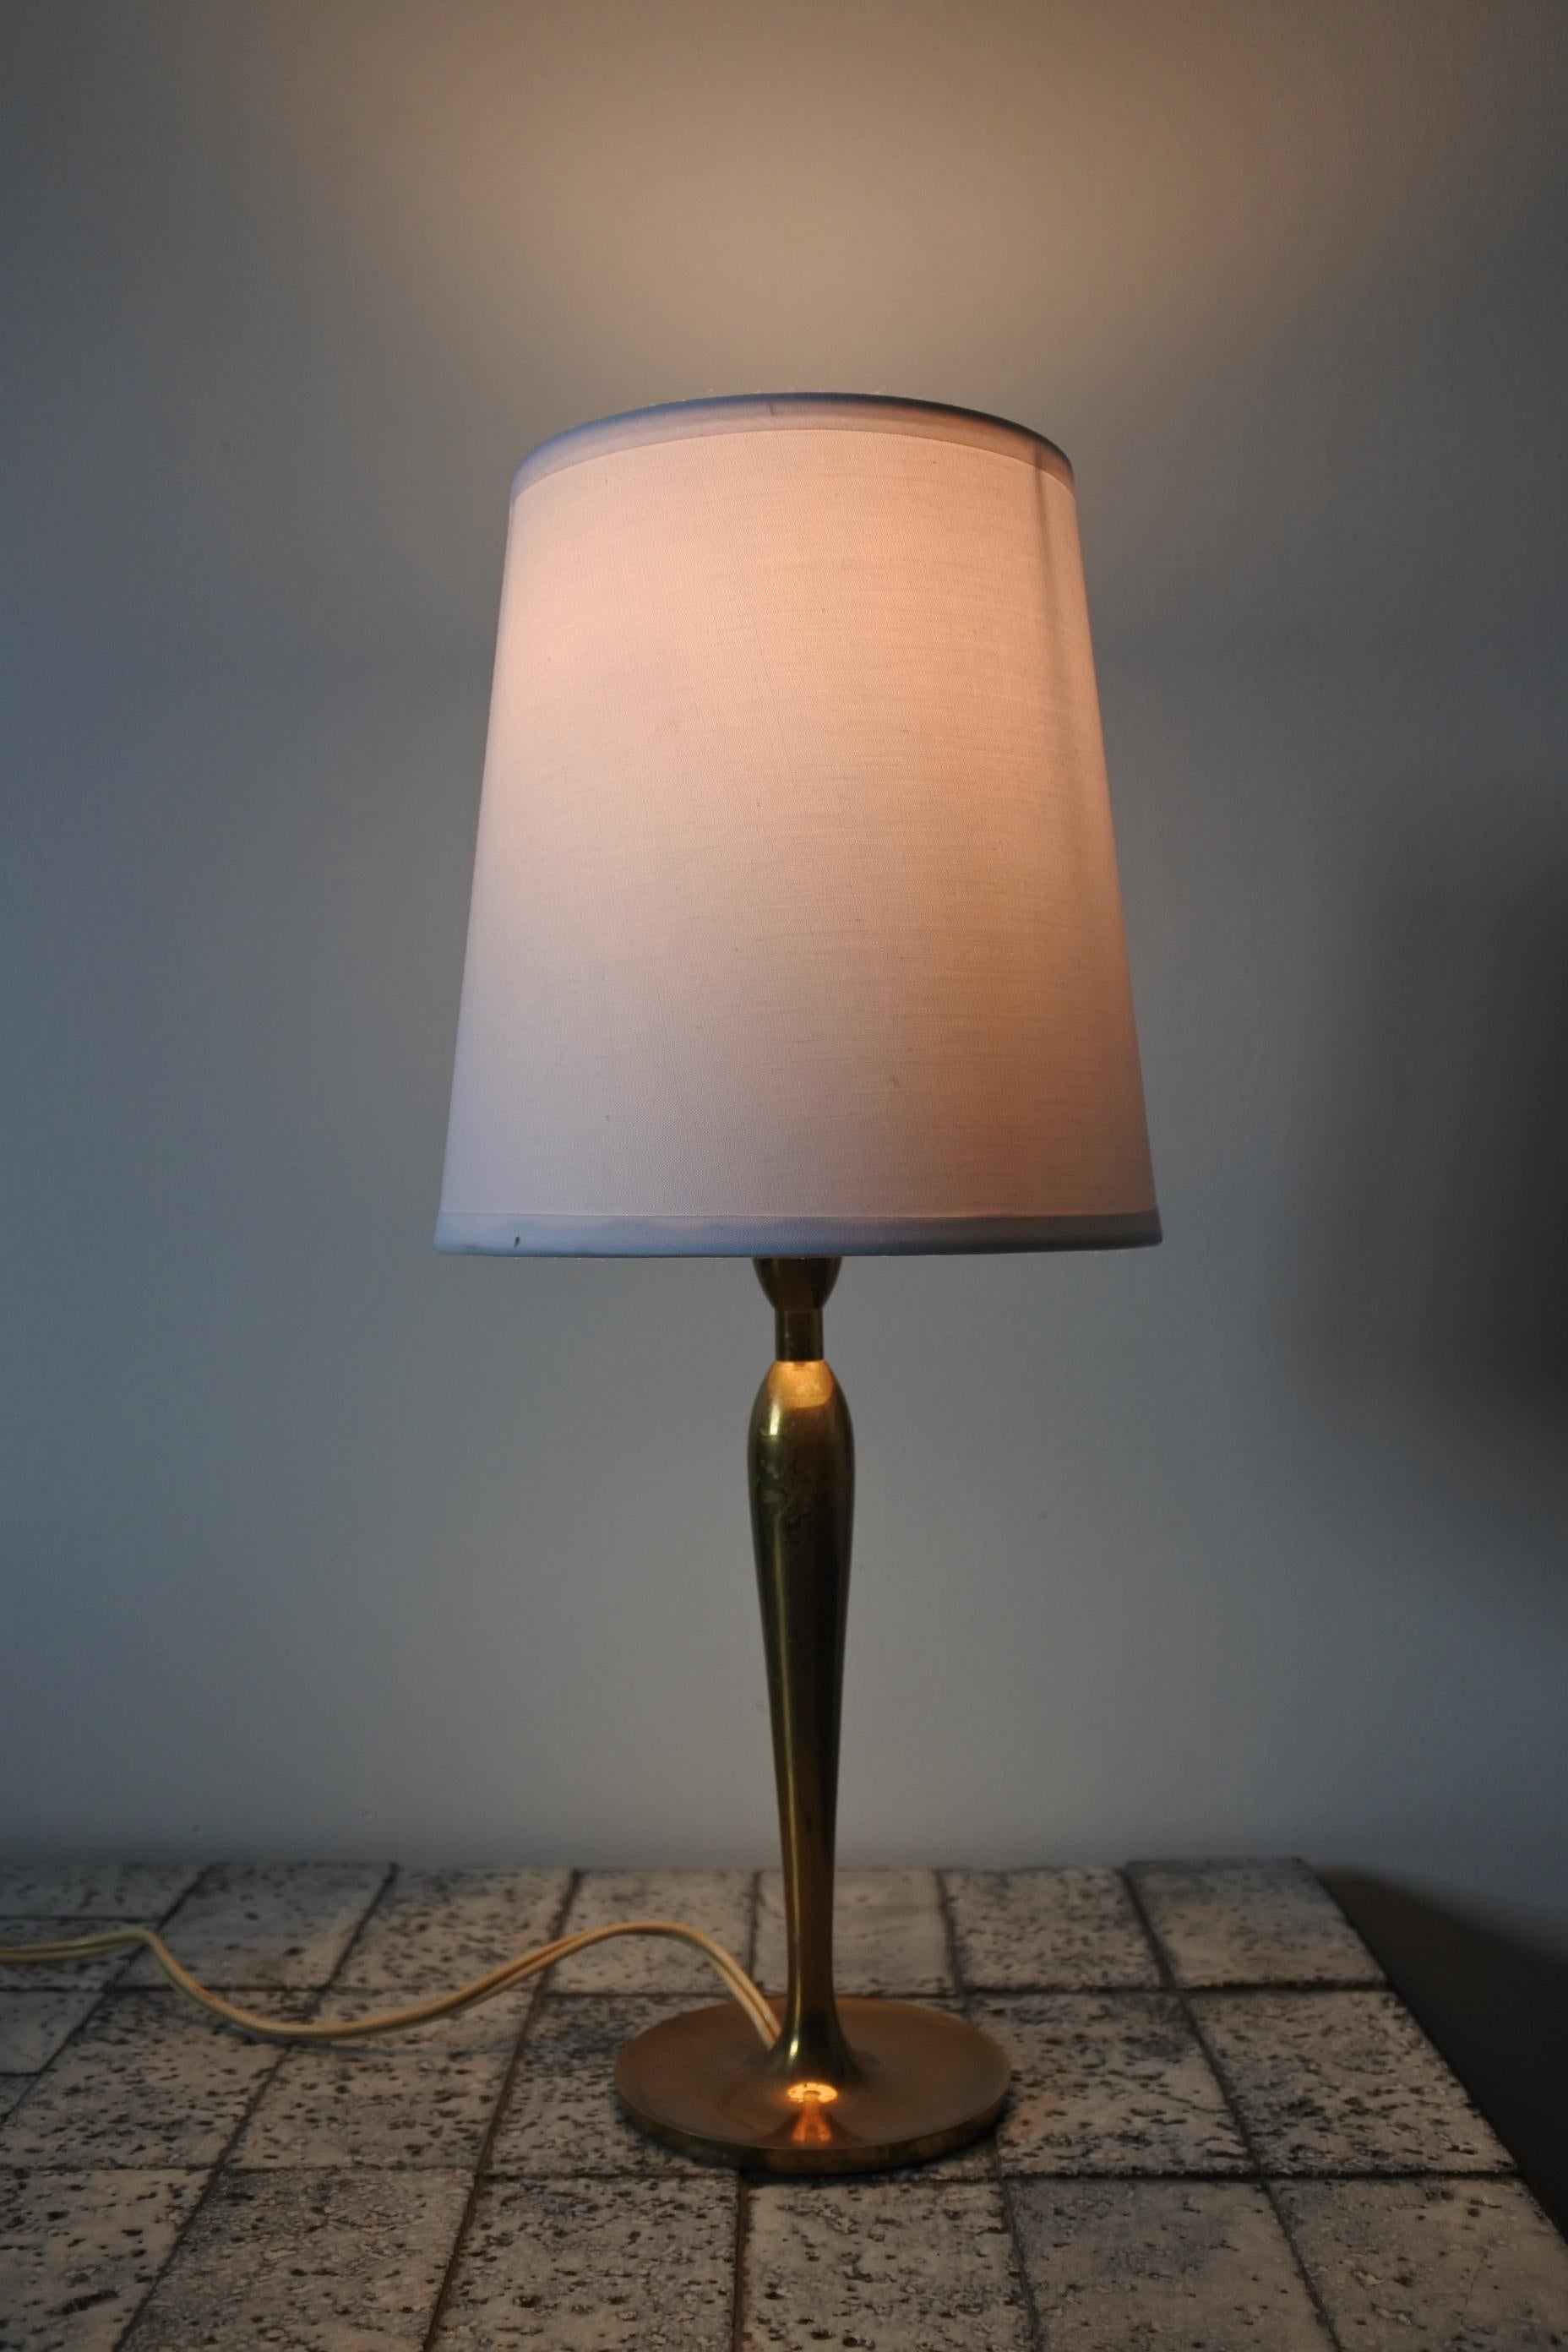 Table lamp in solid brass.
Made in France in the 1950s.

Full original condition with original electrical cables, switch and plug.

Original electrical system. To be safe, the lamp should be checked locally by a specialist to fully comply with local